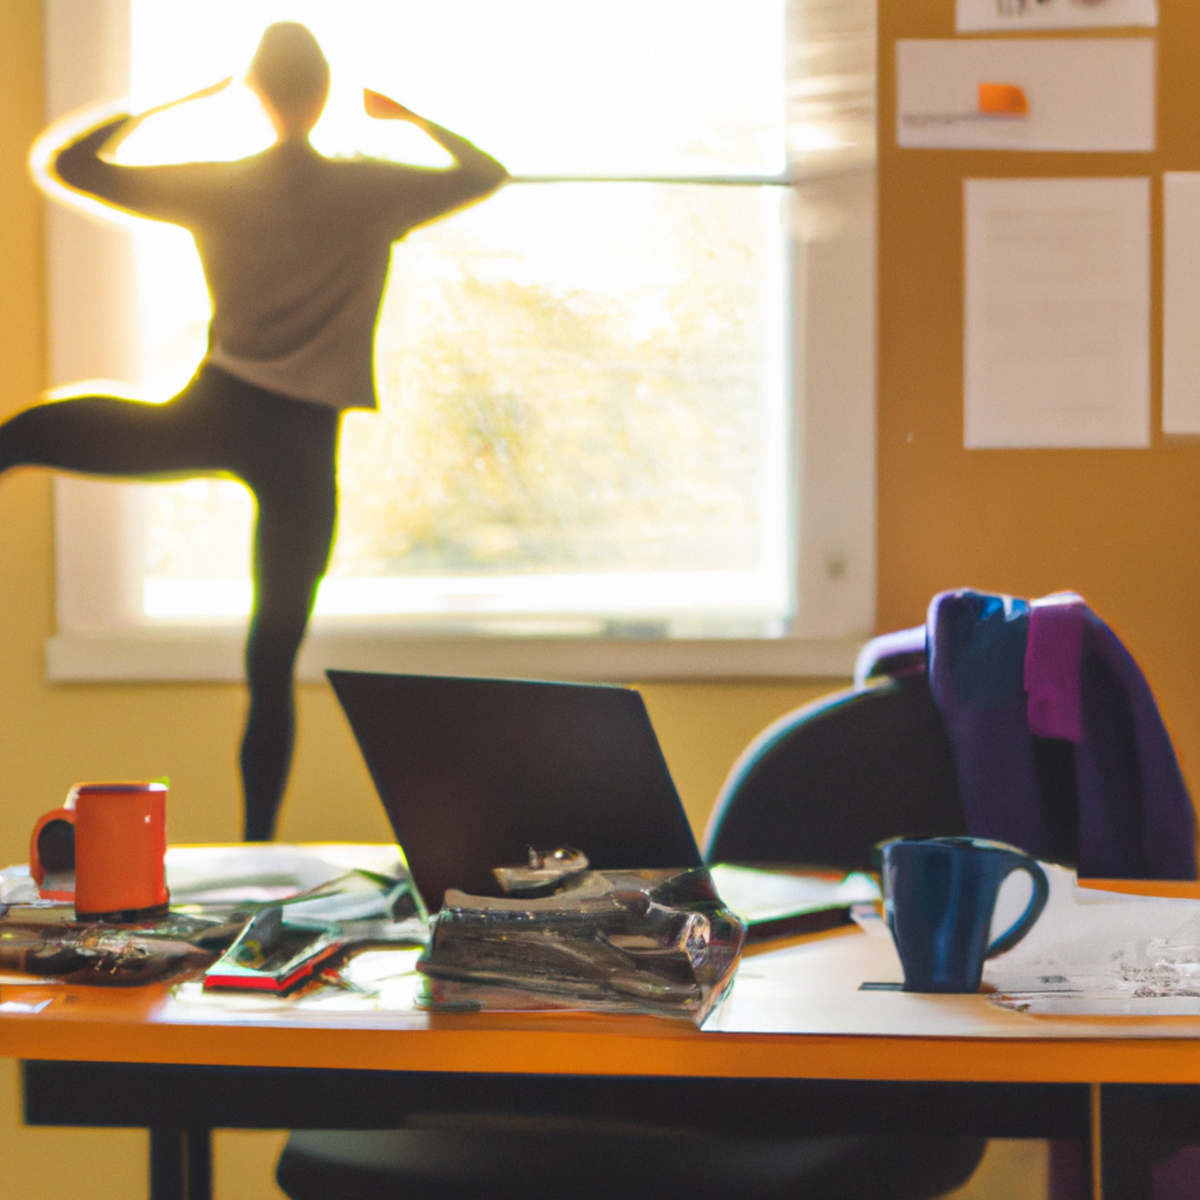 Busy professional's desk with laptop, papers, coffee, phone, yoga mat, and running shoes. Person stretching in background.